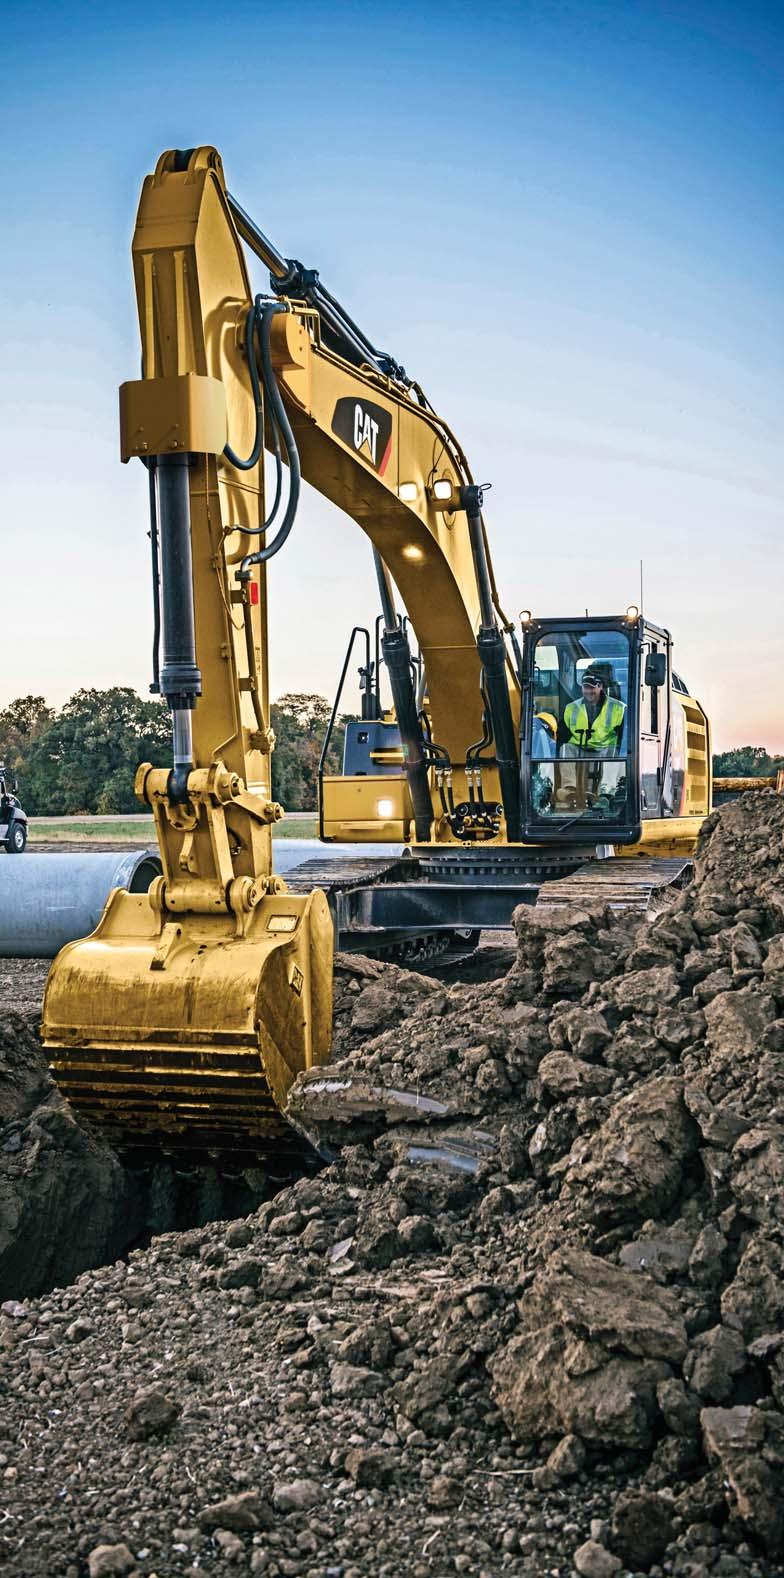 Front Linkage Options for your far-reaching or up-close work. Built To Last Your uptime and service intervals are increased with high-quality, durable, and reliable booms, sticks, and linkage pins.